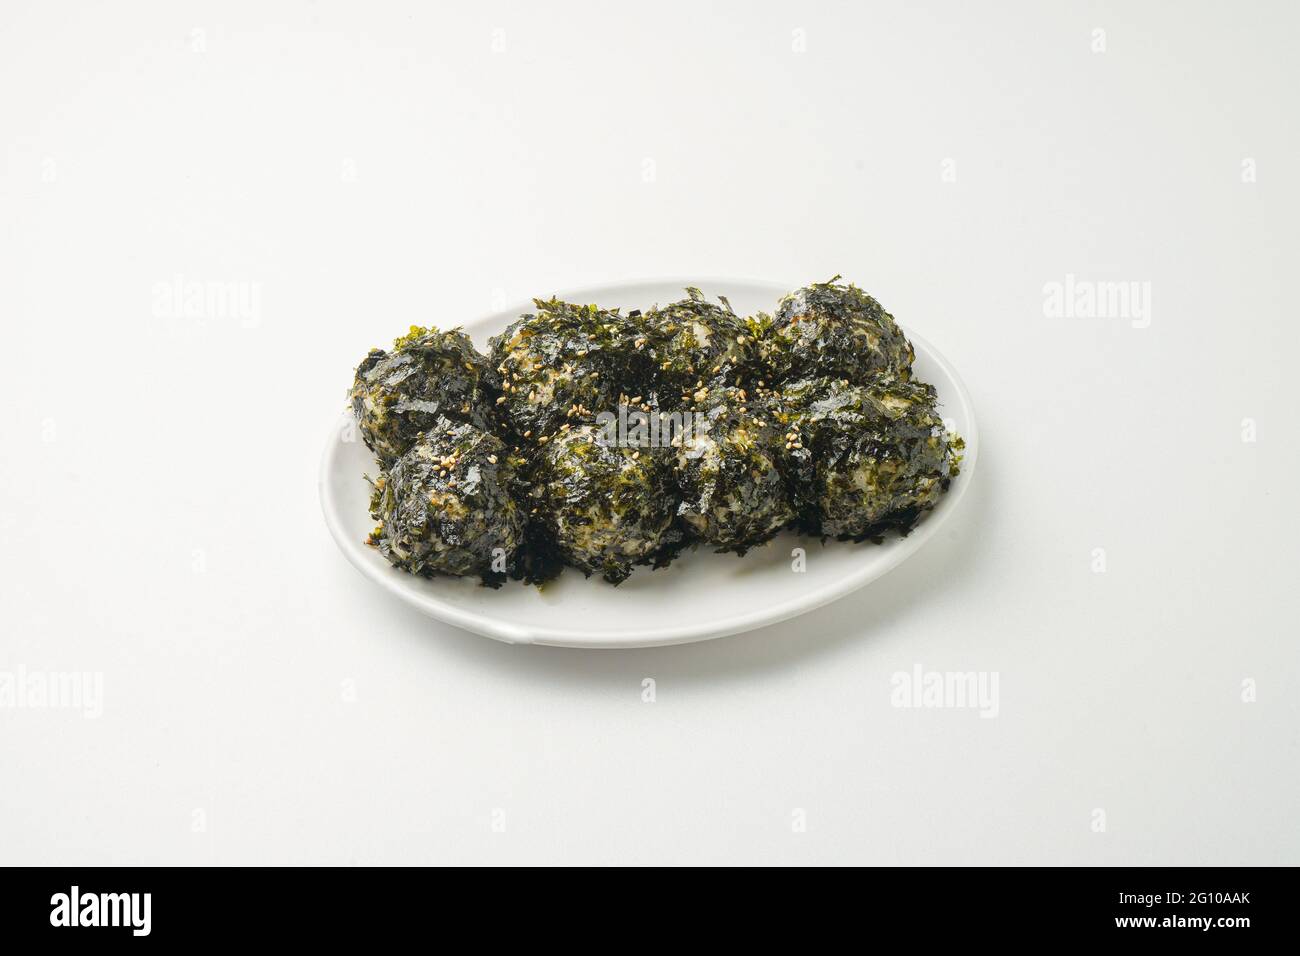 Onigiri or Japanese rice balls in a plate Stock Photo